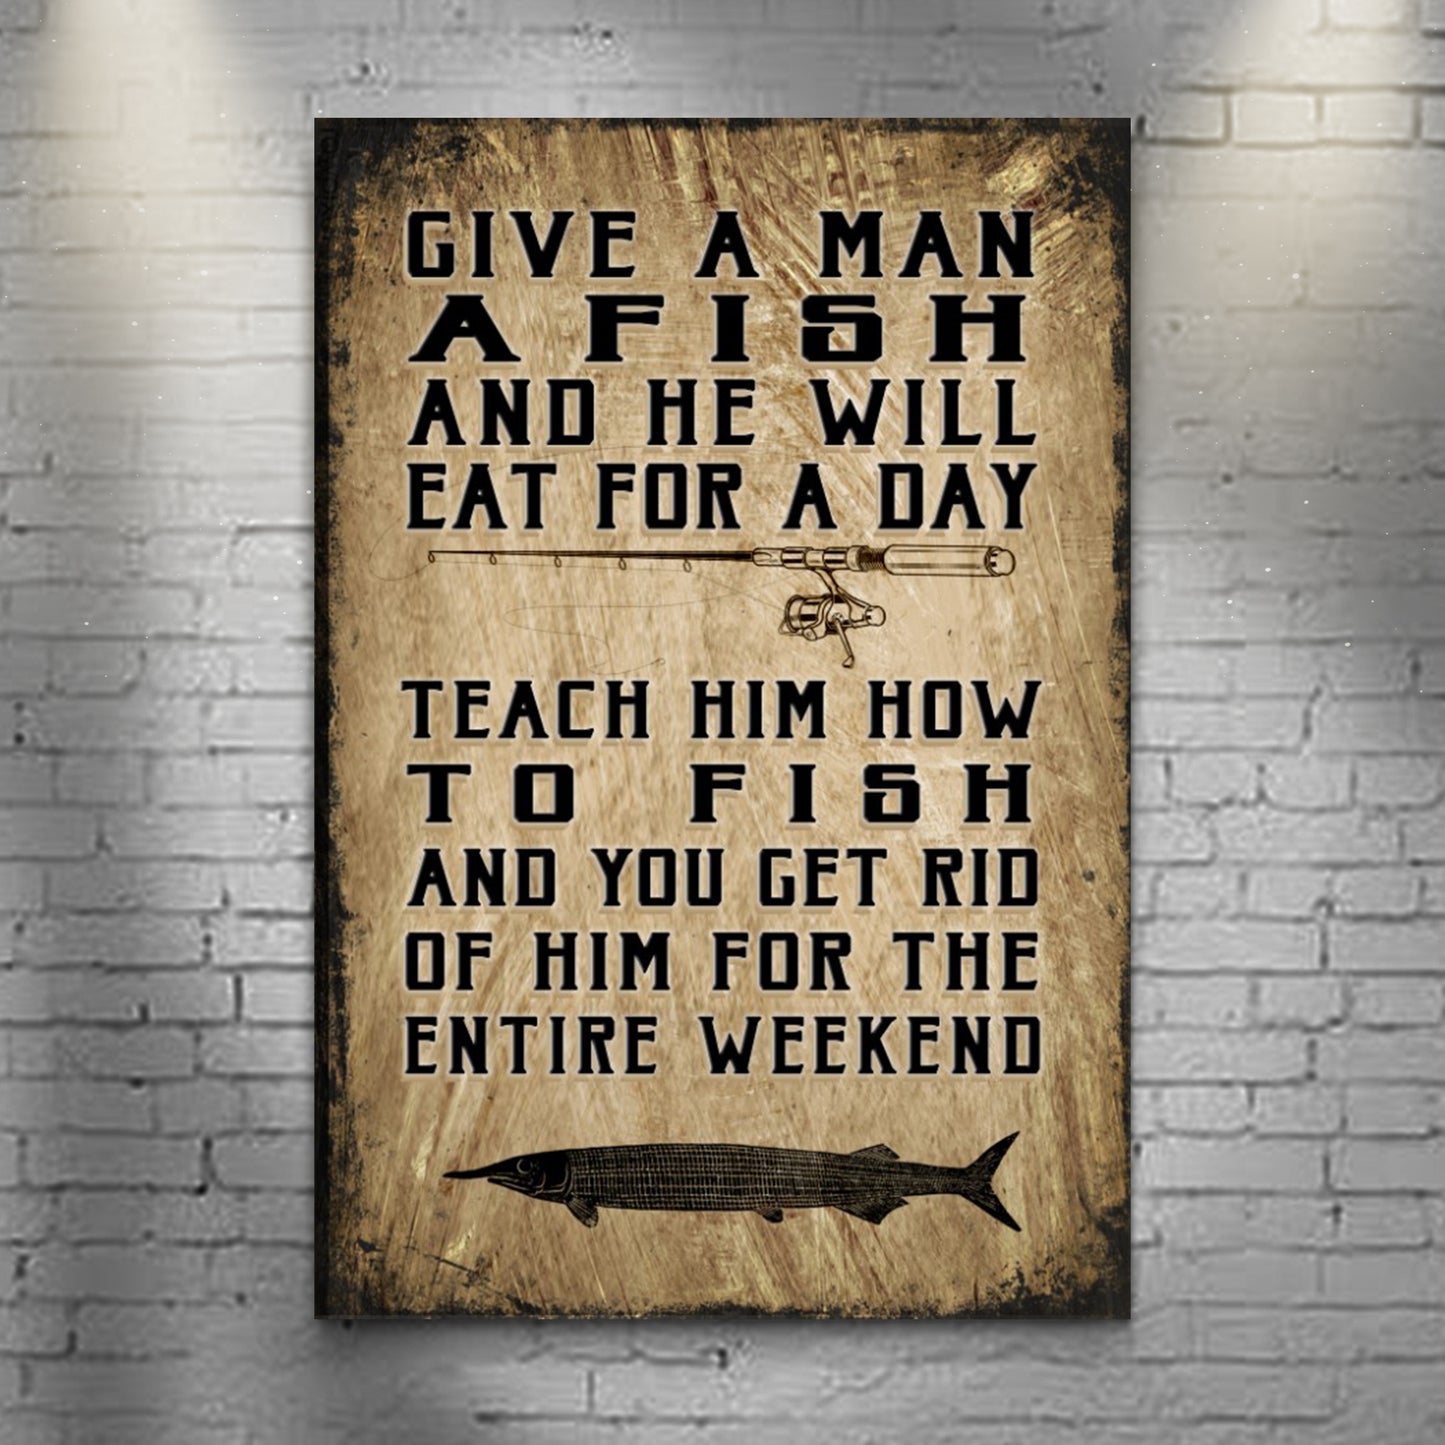 Teach A Man How To Fish And You Get Rid Of Him For The Entire Weekend Sign II - Image by Tailored Canvases